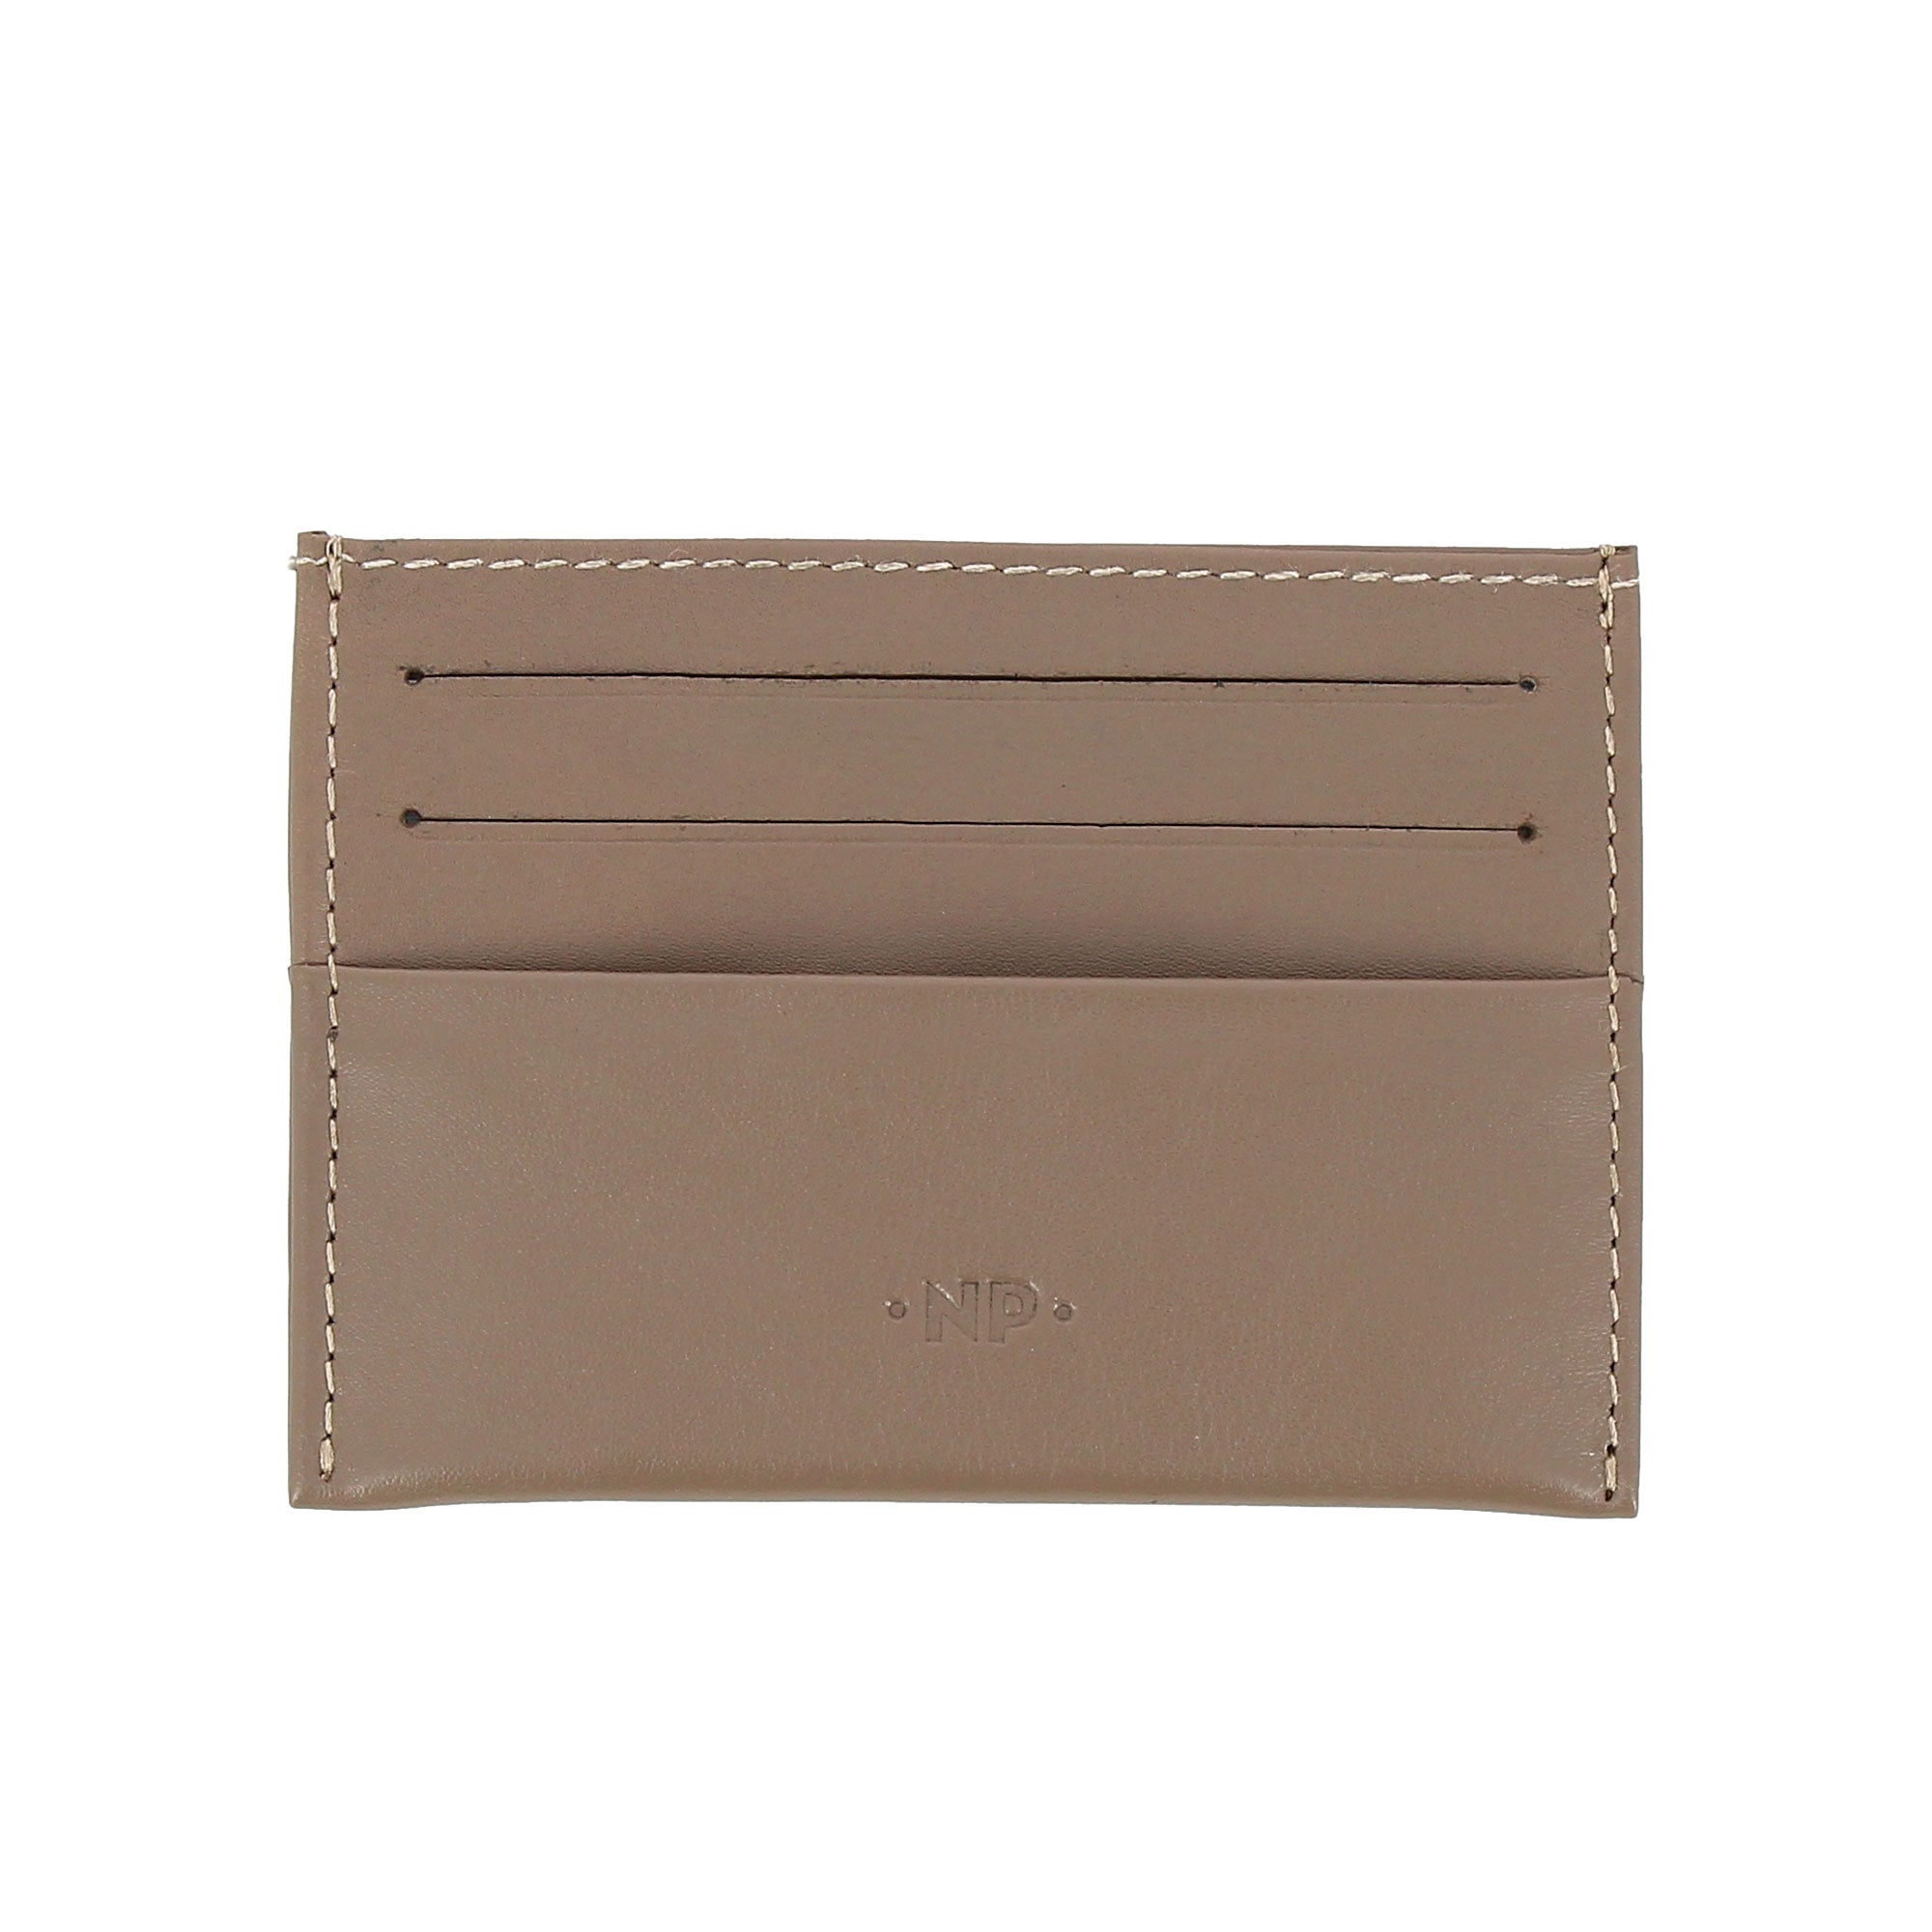 Nuvola Pelle Nappa Leather Card Holder Melvin - Artisia Store